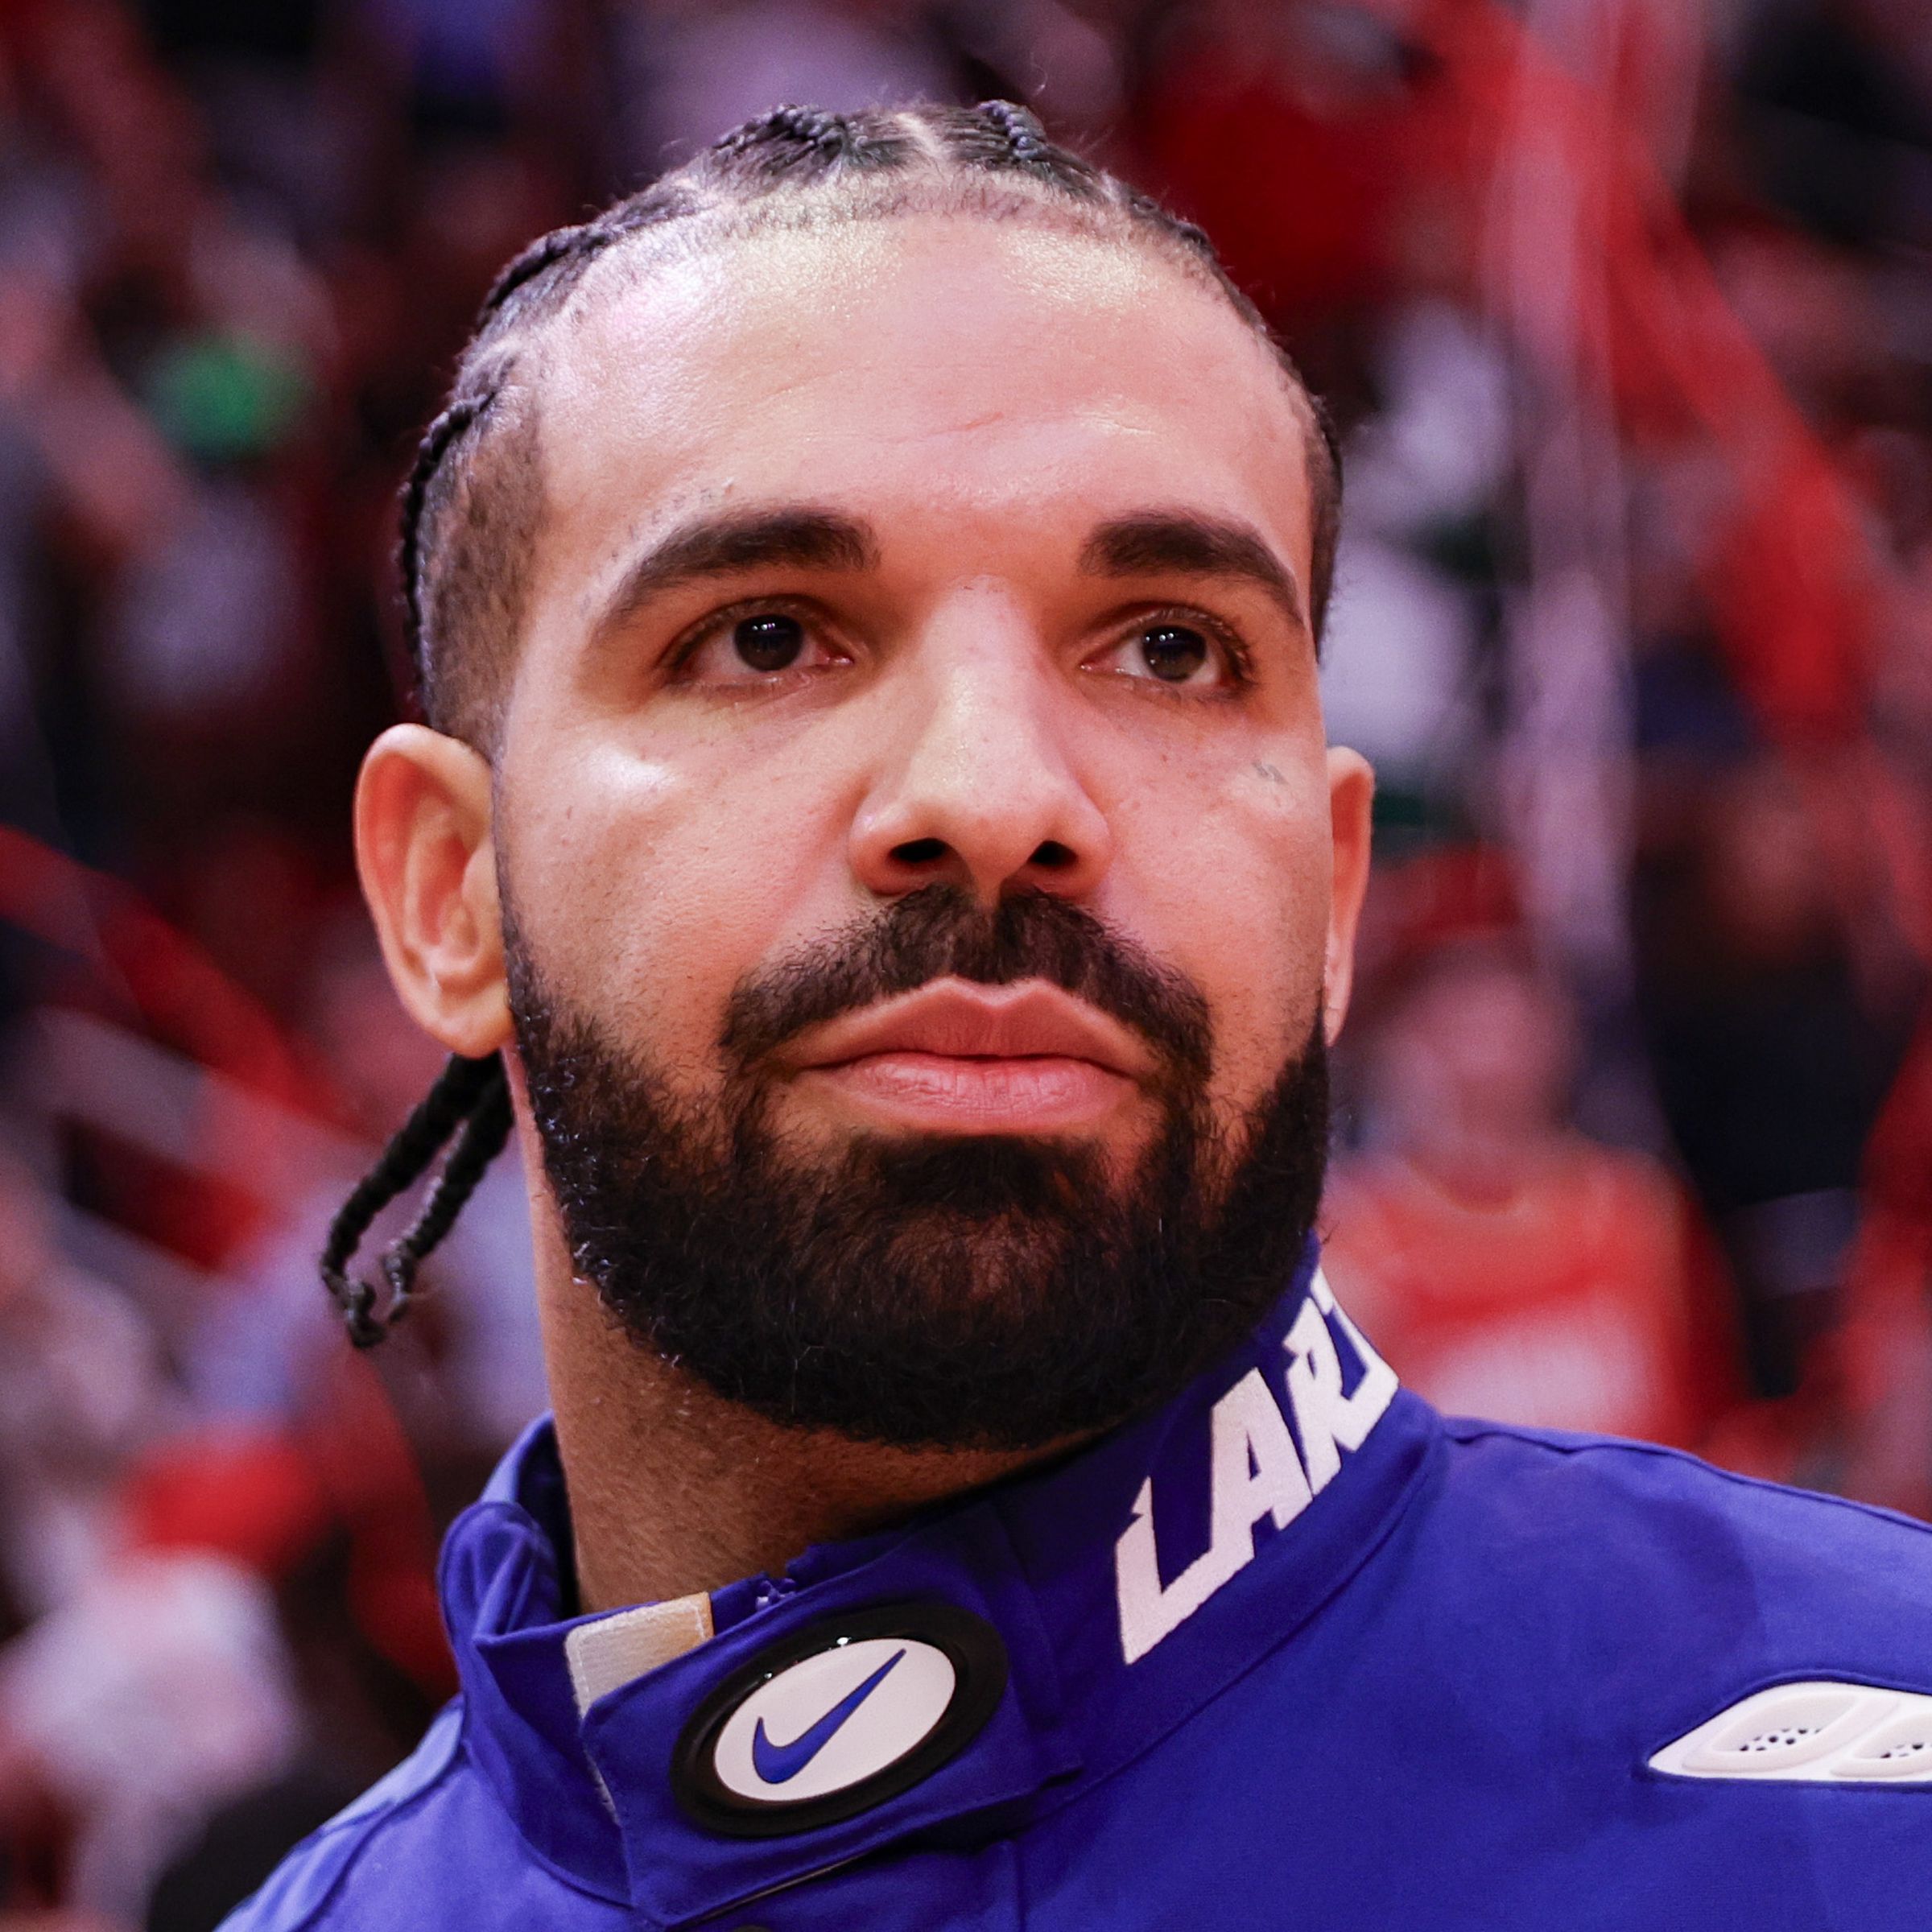 Rapper, songwriter, and icon Drake attends a game between the Houston Rockets and the Cleveland Cavaliers at Toyota Center on March 16, 2024 in Houston, Texas.